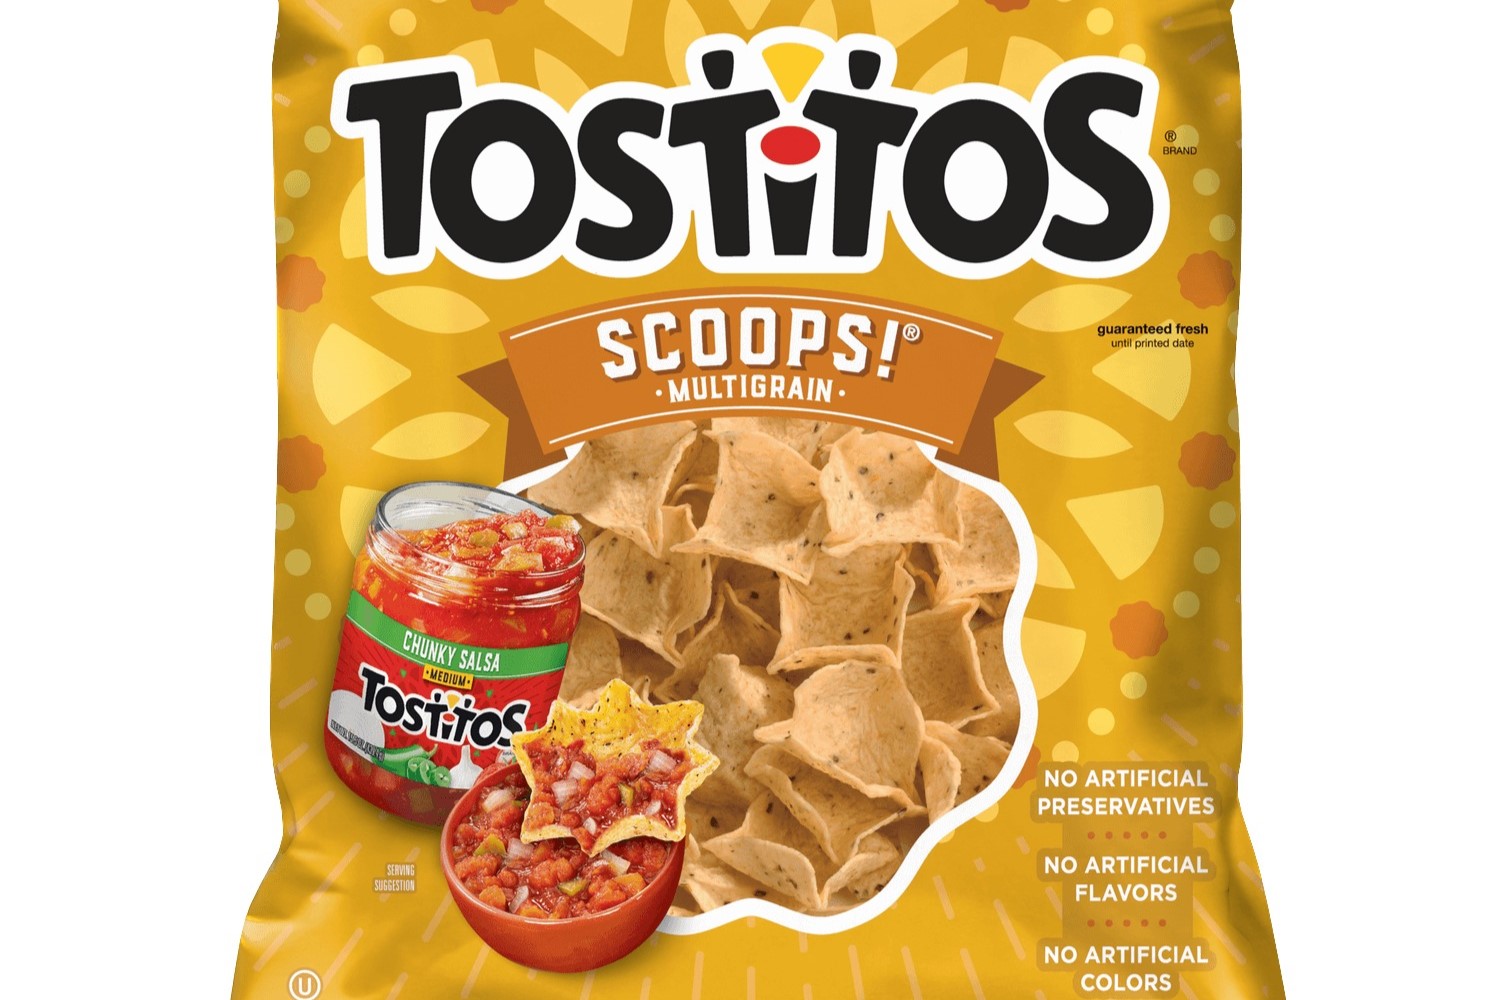 19-tostitos-multigrain-scoops-nutrition-facts